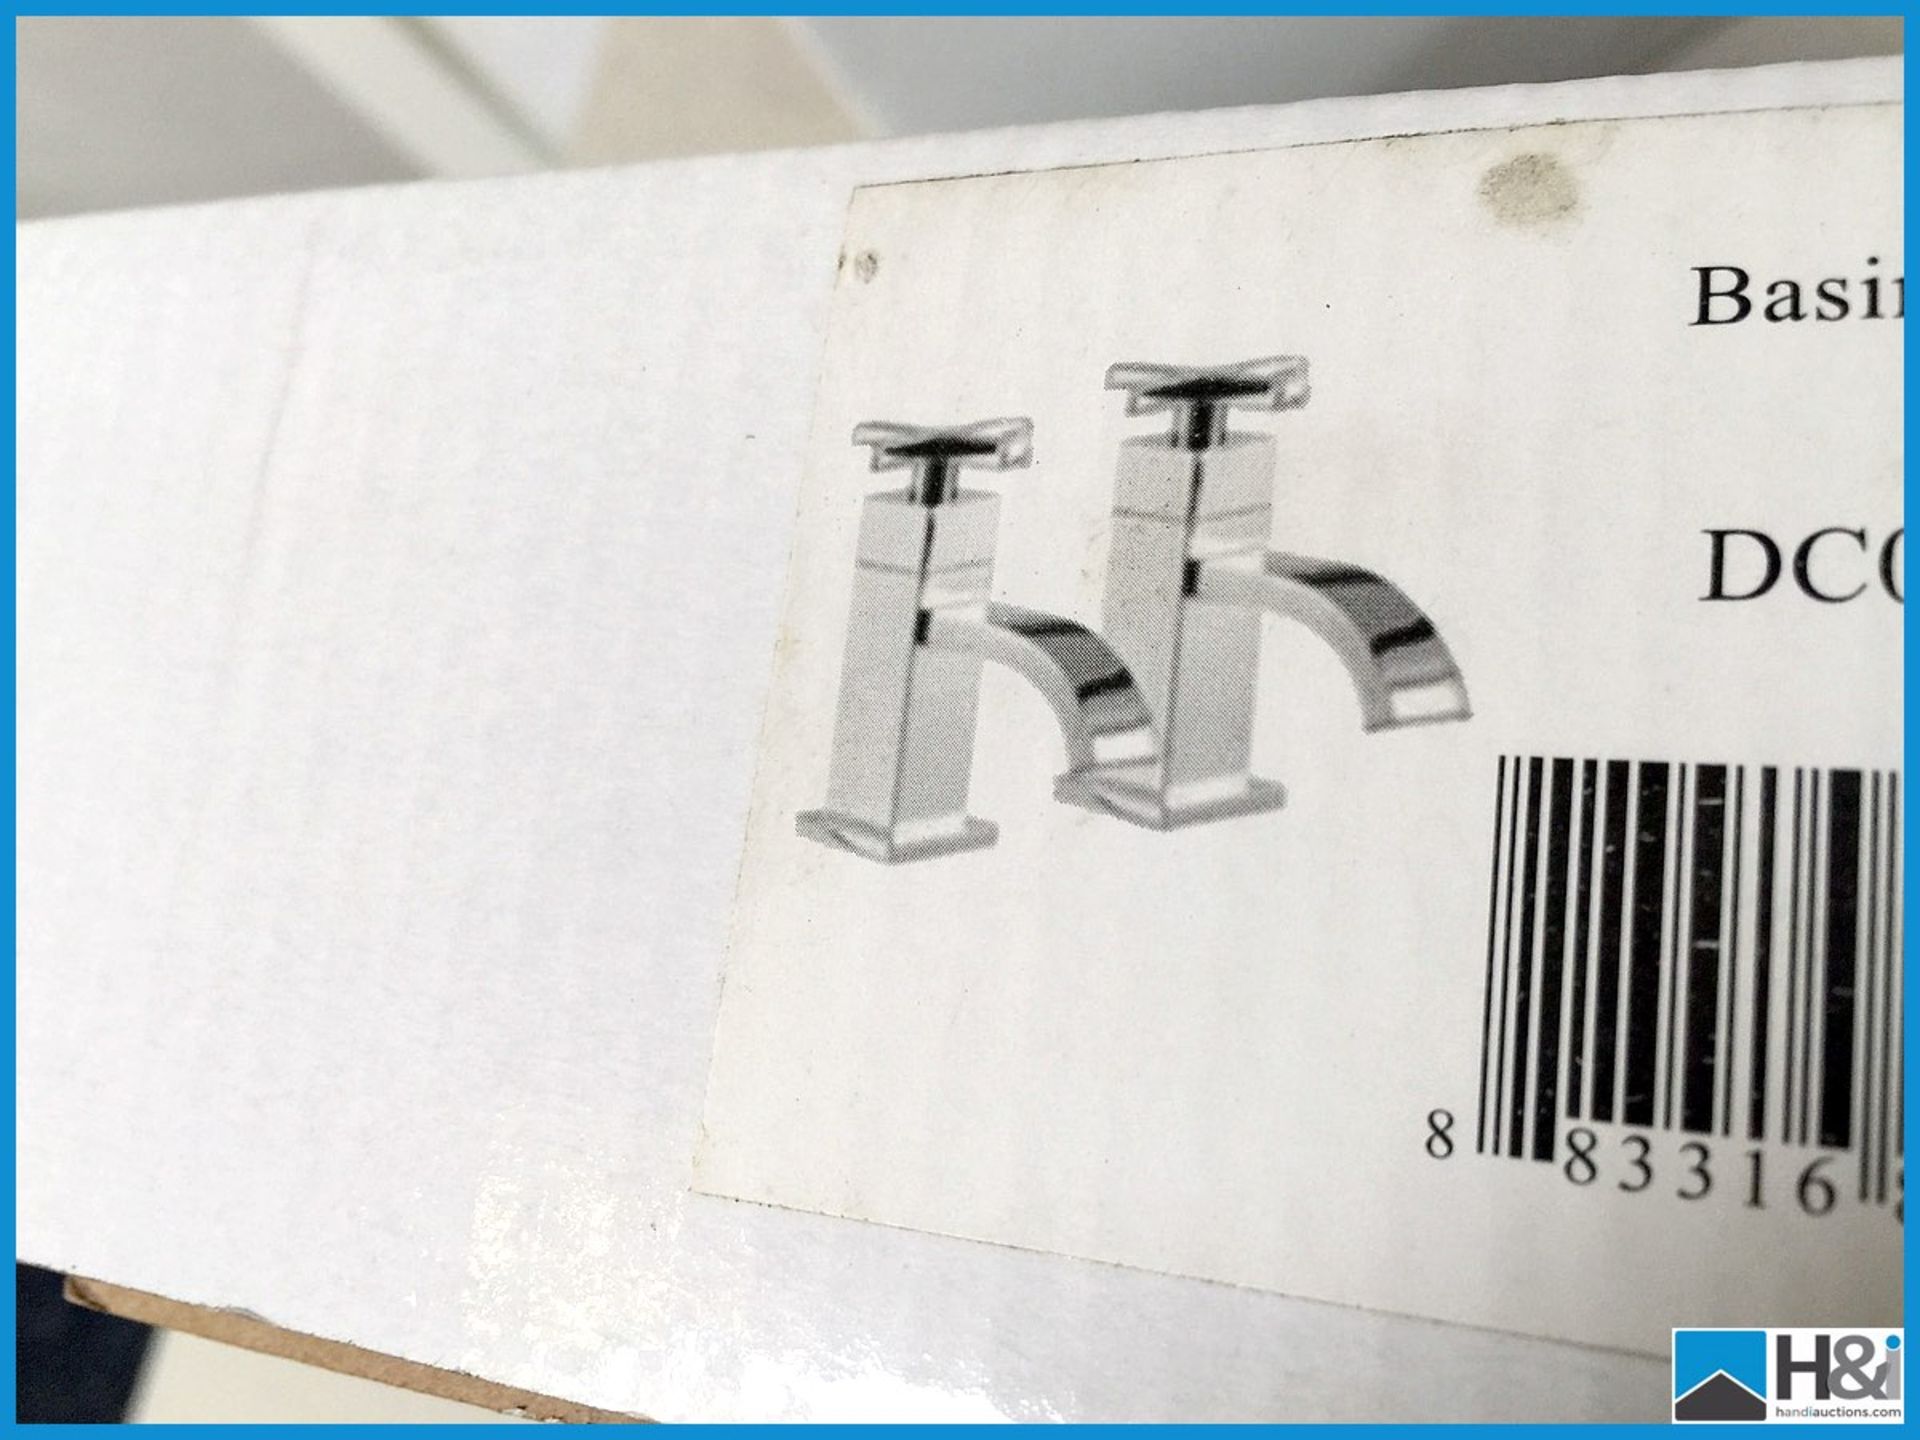 Pair of Beautiful Phoenix basin mixer taps with contemporary cross head design brand new in box - Image 5 of 5